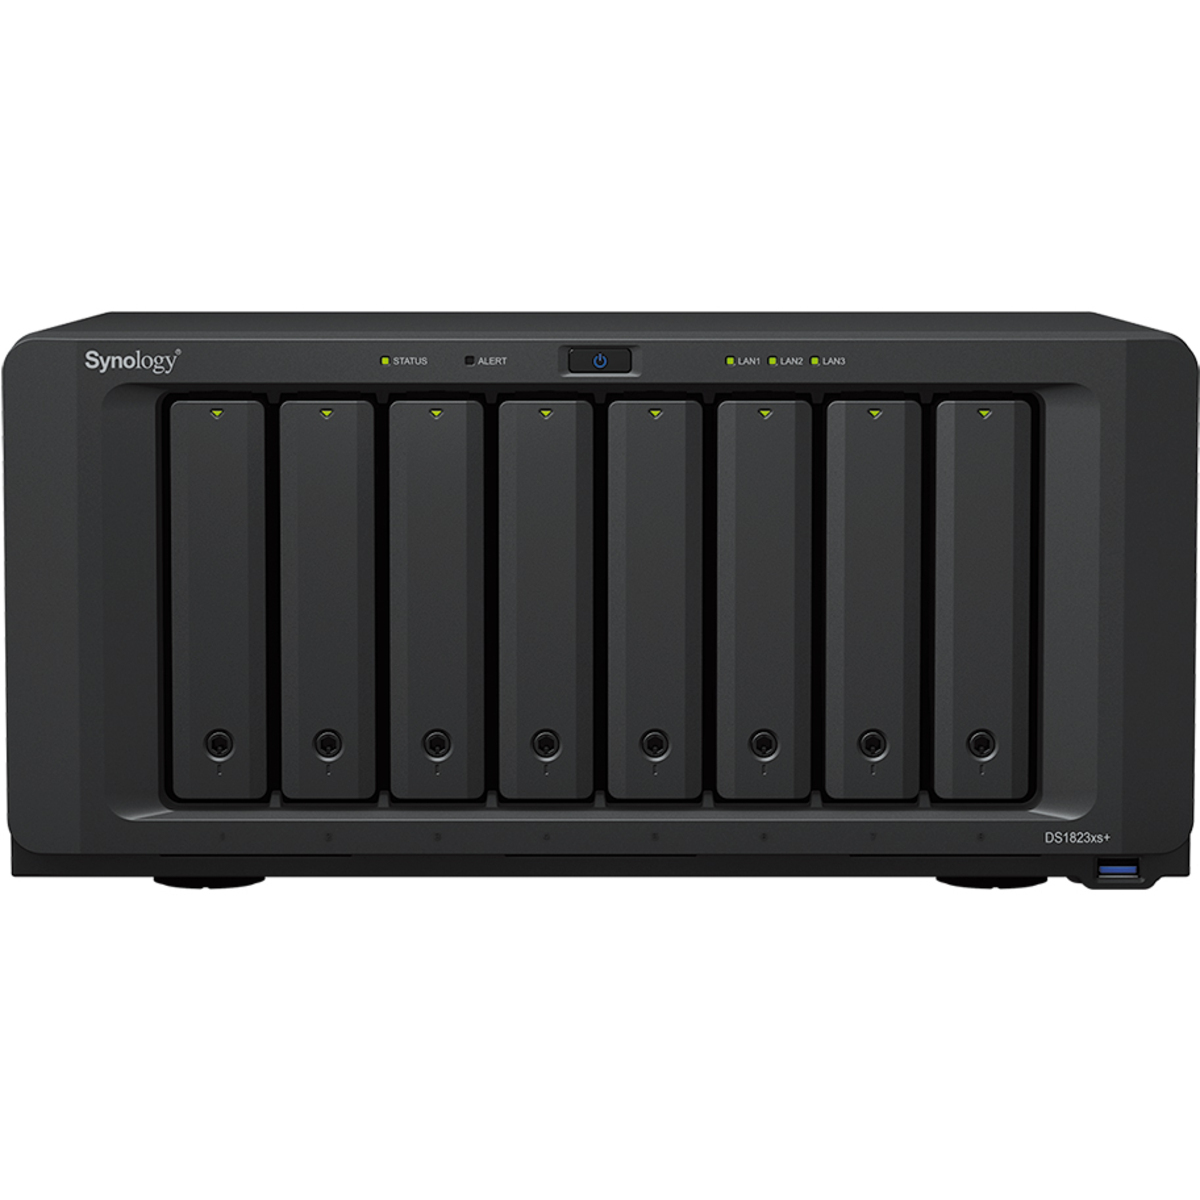 Synology DiskStation DS1823xs+ 10tb 8-Bay Desktop Multimedia / Power User / Business NAS - Network Attached Storage Device 5x2tb Samsung 870 QVO MZ-77Q2T0 2.5 560/530MB/s SATA 6Gb/s SSD CONSUMER Class Drives Installed - Burn-In Tested DiskStation DS1823xs+